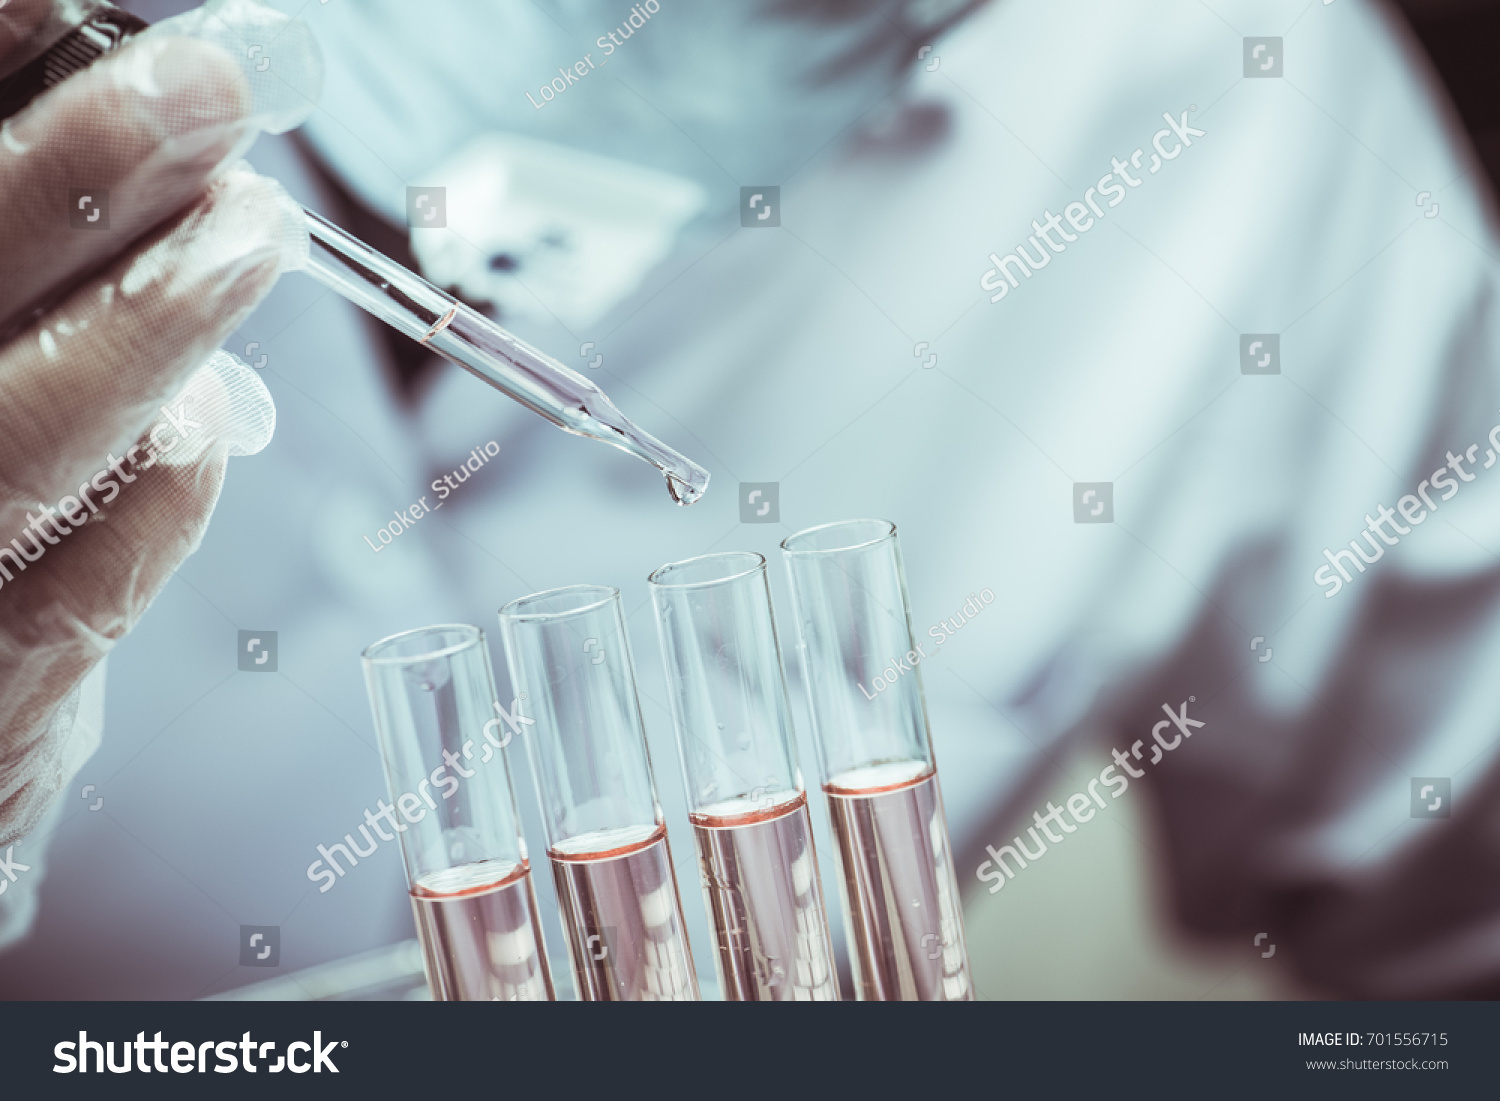 scientist dropping chemical liquid to flask with lab glassware background, Laboratory research concept,Researcher is dropping the reagent into test tube. #701556715